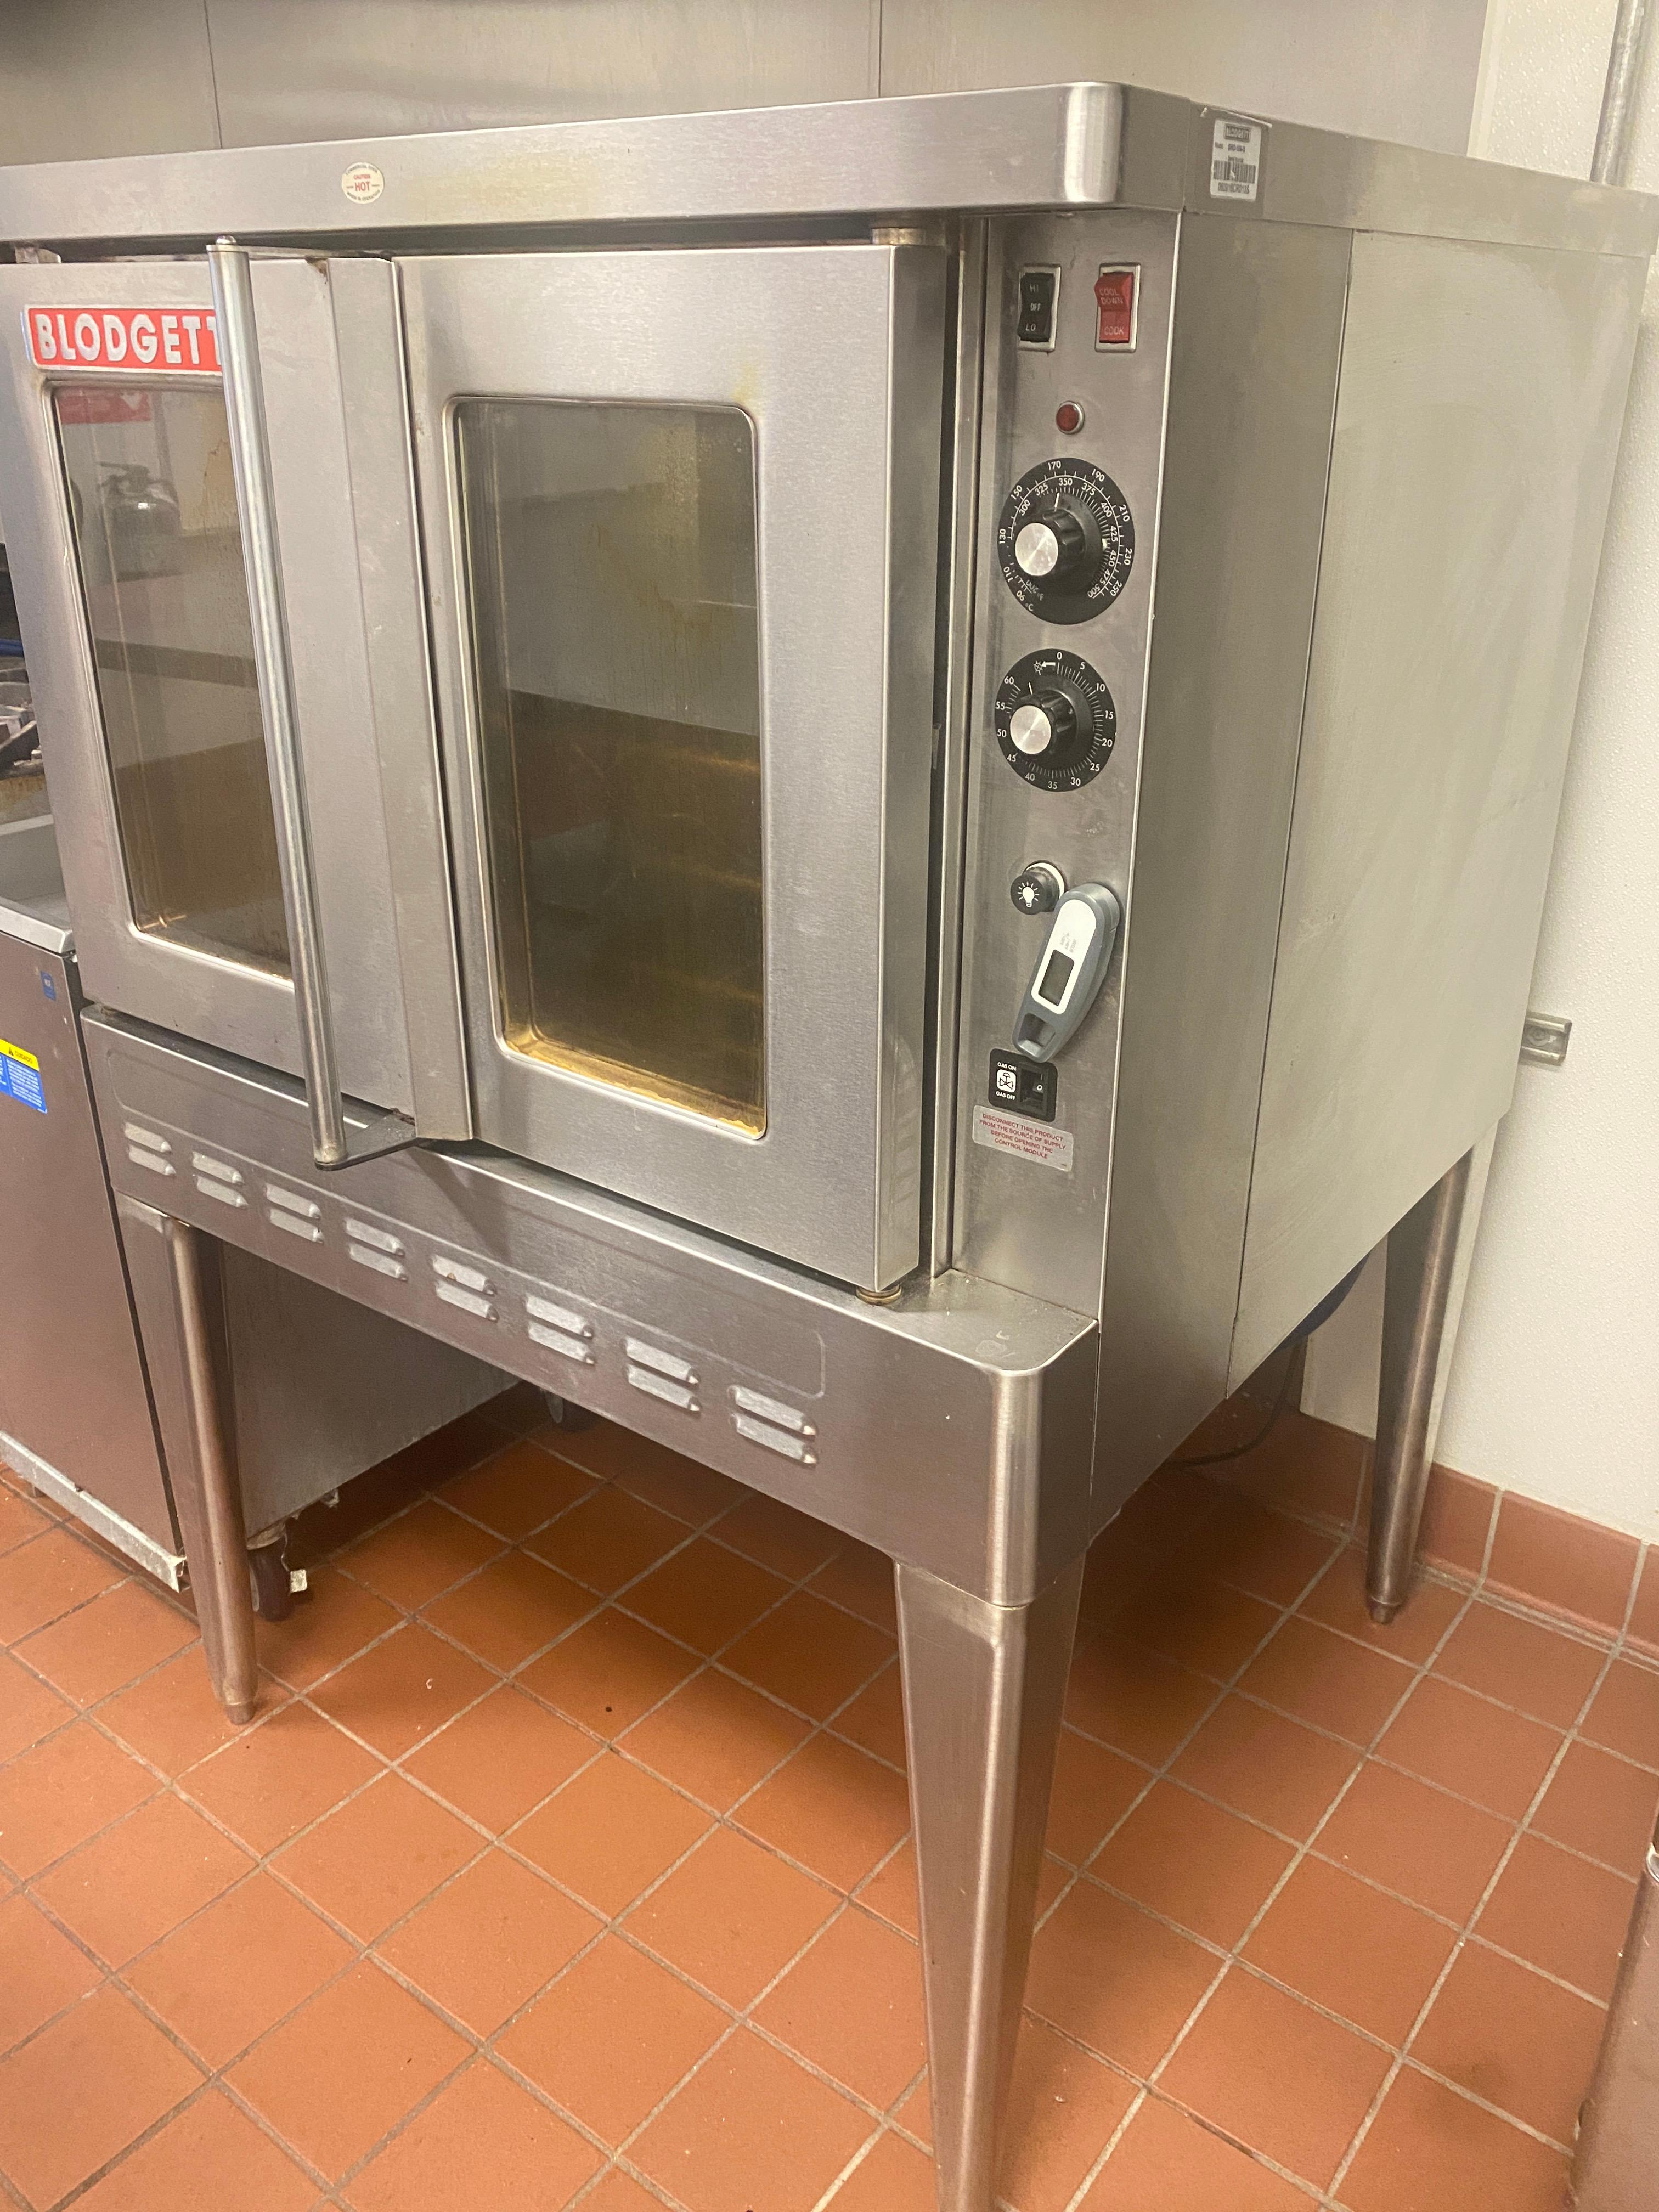 Blodgett Stand Up Gas Convection Oven Model Sho -200-G